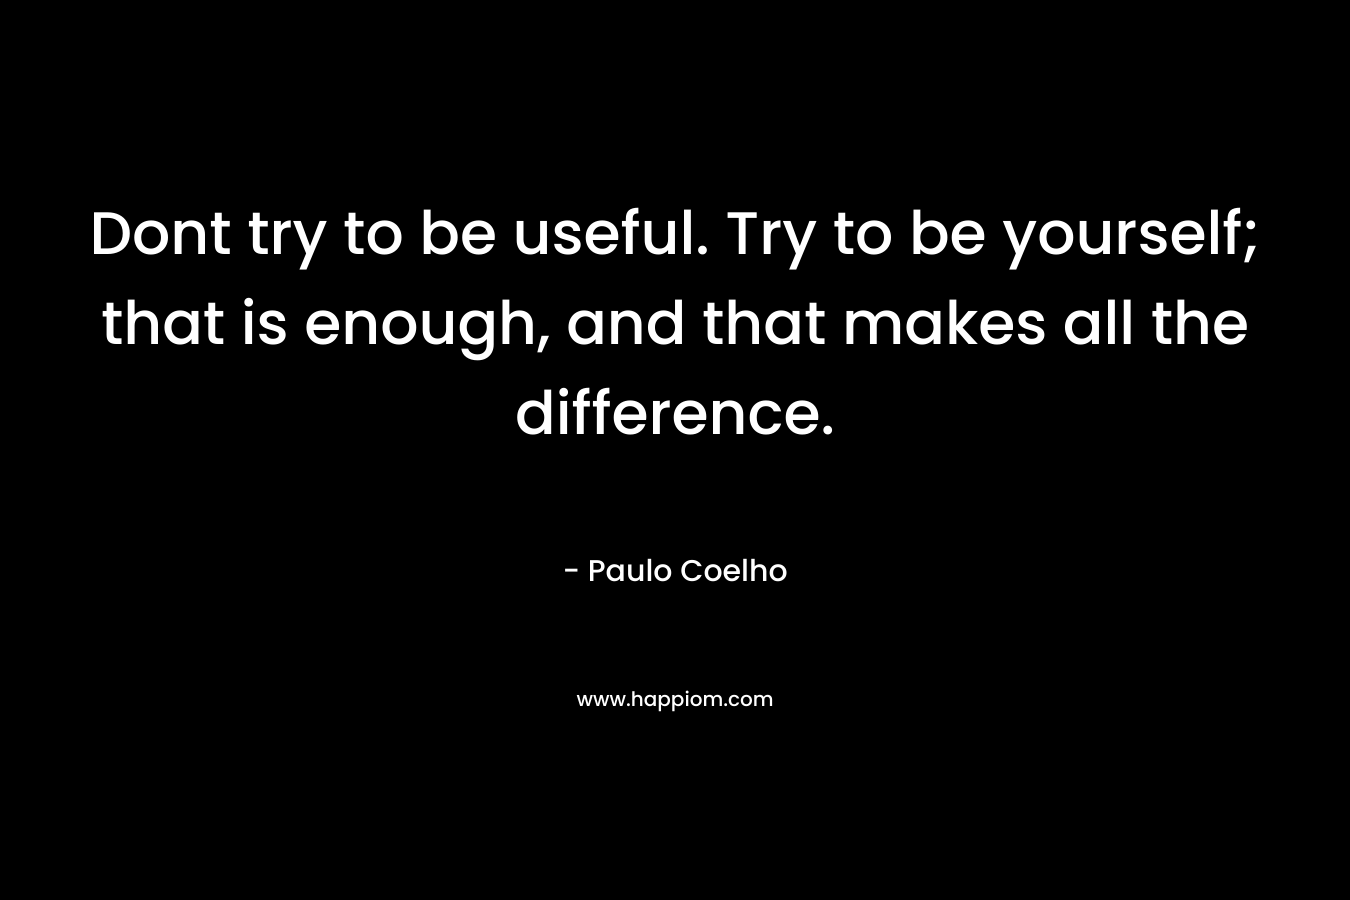 Dont try to be useful. Try to be yourself; that is enough, and that makes all the difference.